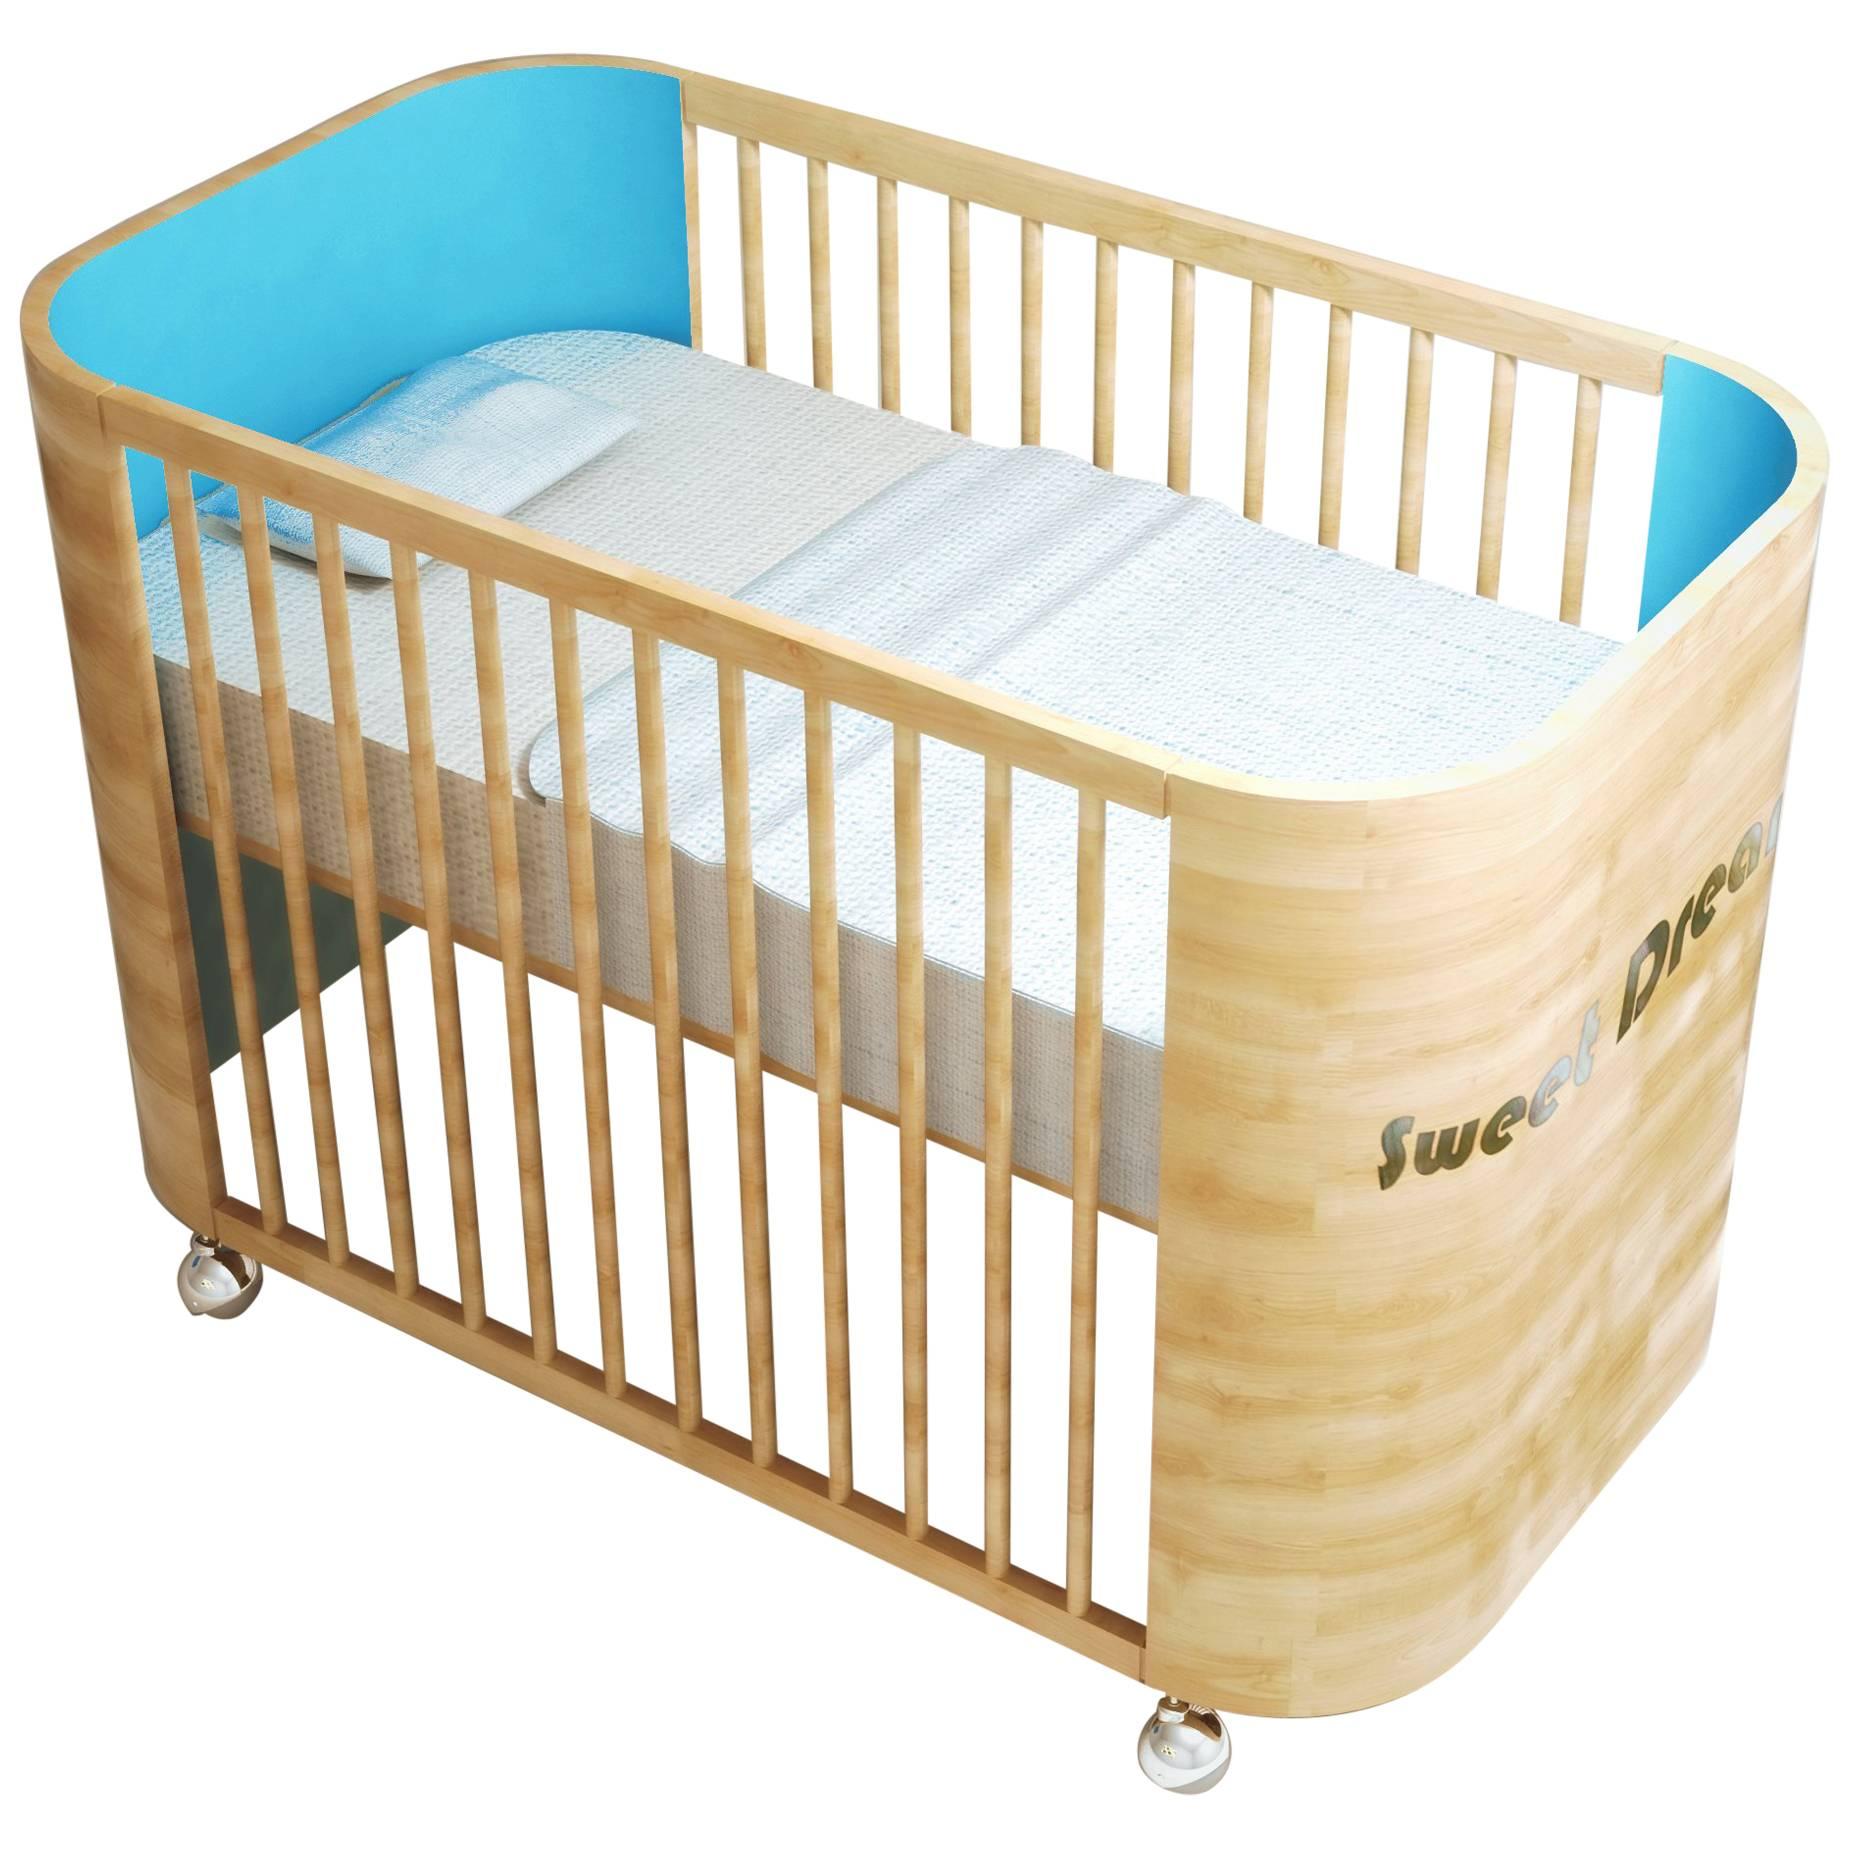 Embrace Dreams Crib in Beechwood and Turquoise by Misk Nursery For Sale